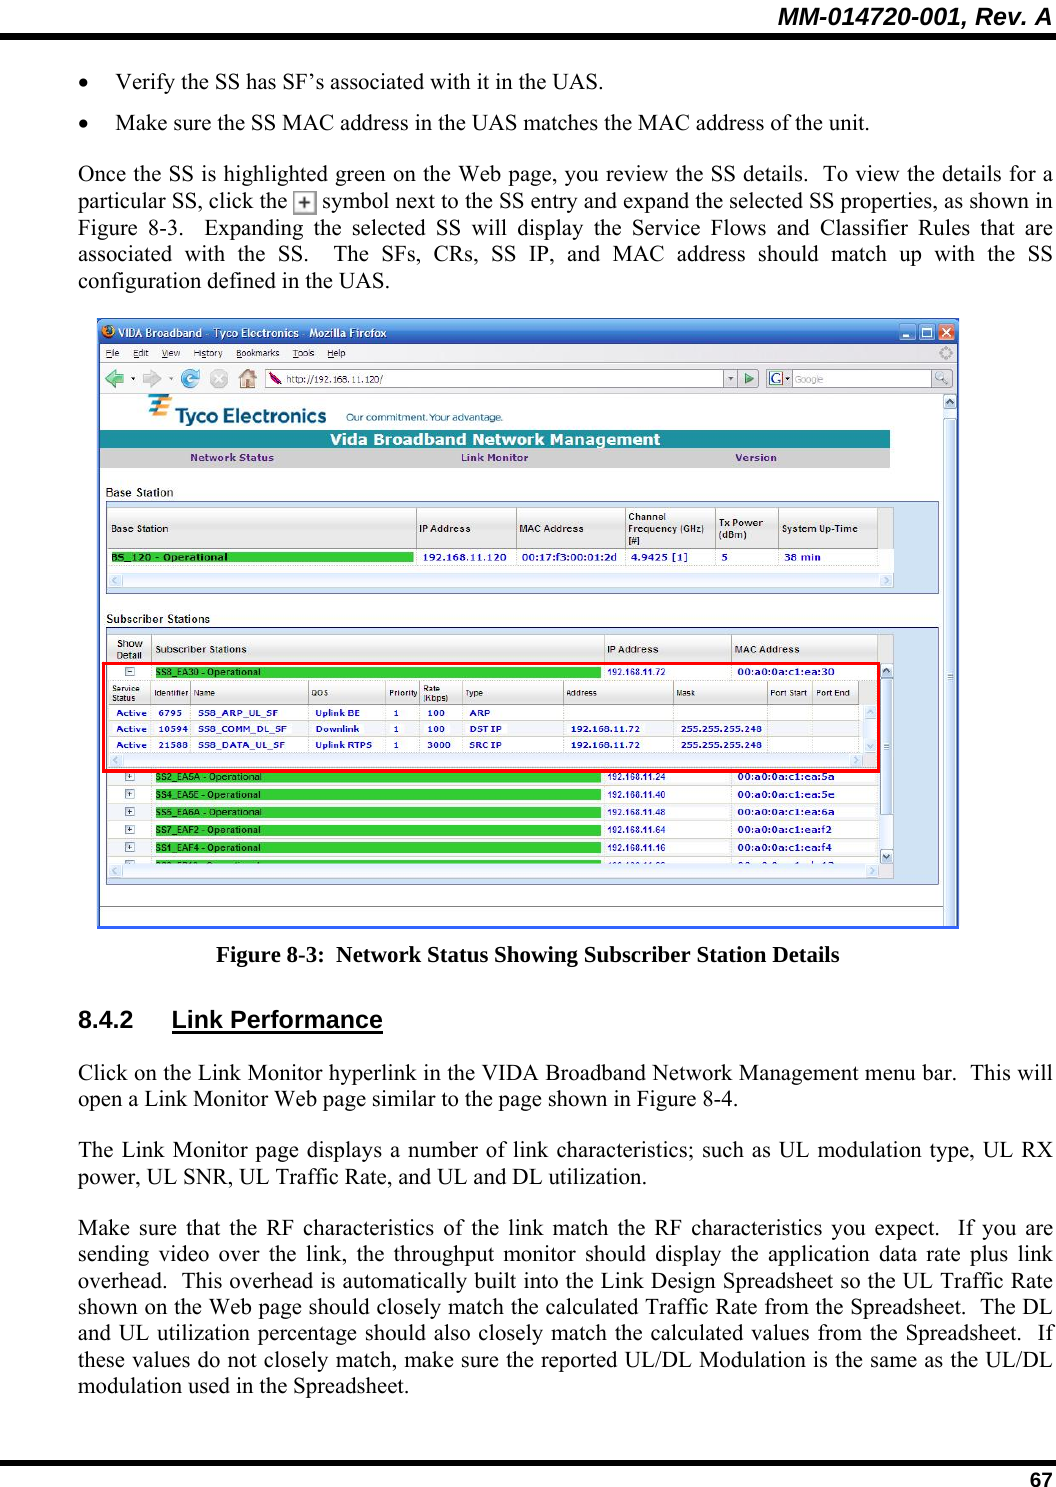 MM-014720-001, Rev. A  67 • Verify the SS has SF’s associated with it in the UAS.   • Make sure the SS MAC address in the UAS matches the MAC address of the unit.  Once the SS is highlighted green on the Web page, you review the SS details.  To view the details for a particular SS, click the   symbol next to the SS entry and expand the selected SS properties, as shown in Figure 8-3.  Expanding the selected SS will display the Service Flows and Classifier Rules that are associated with the SS.  The SFs, CRs, SS IP, and MAC address should match up with the SS configuration defined in the UAS.   Figure 8-3:  Network Status Showing Subscriber Station Details 8.4.2 Link Performance Click on the Link Monitor hyperlink in the VIDA Broadband Network Management menu bar.  This will open a Link Monitor Web page similar to the page shown in Figure 8-4. The Link Monitor page displays a number of link characteristics; such as UL modulation type, UL RX power, UL SNR, UL Traffic Rate, and UL and DL utilization.   Make sure that the RF characteristics of the link match the RF characteristics you expect.  If you are sending video over the link, the throughput monitor should display the application data rate plus link overhead.  This overhead is automatically built into the Link Design Spreadsheet so the UL Traffic Rate shown on the Web page should closely match the calculated Traffic Rate from the Spreadsheet.  The DL and UL utilization percentage should also closely match the calculated values from the Spreadsheet.  If these values do not closely match, make sure the reported UL/DL Modulation is the same as the UL/DL modulation used in the Spreadsheet.   